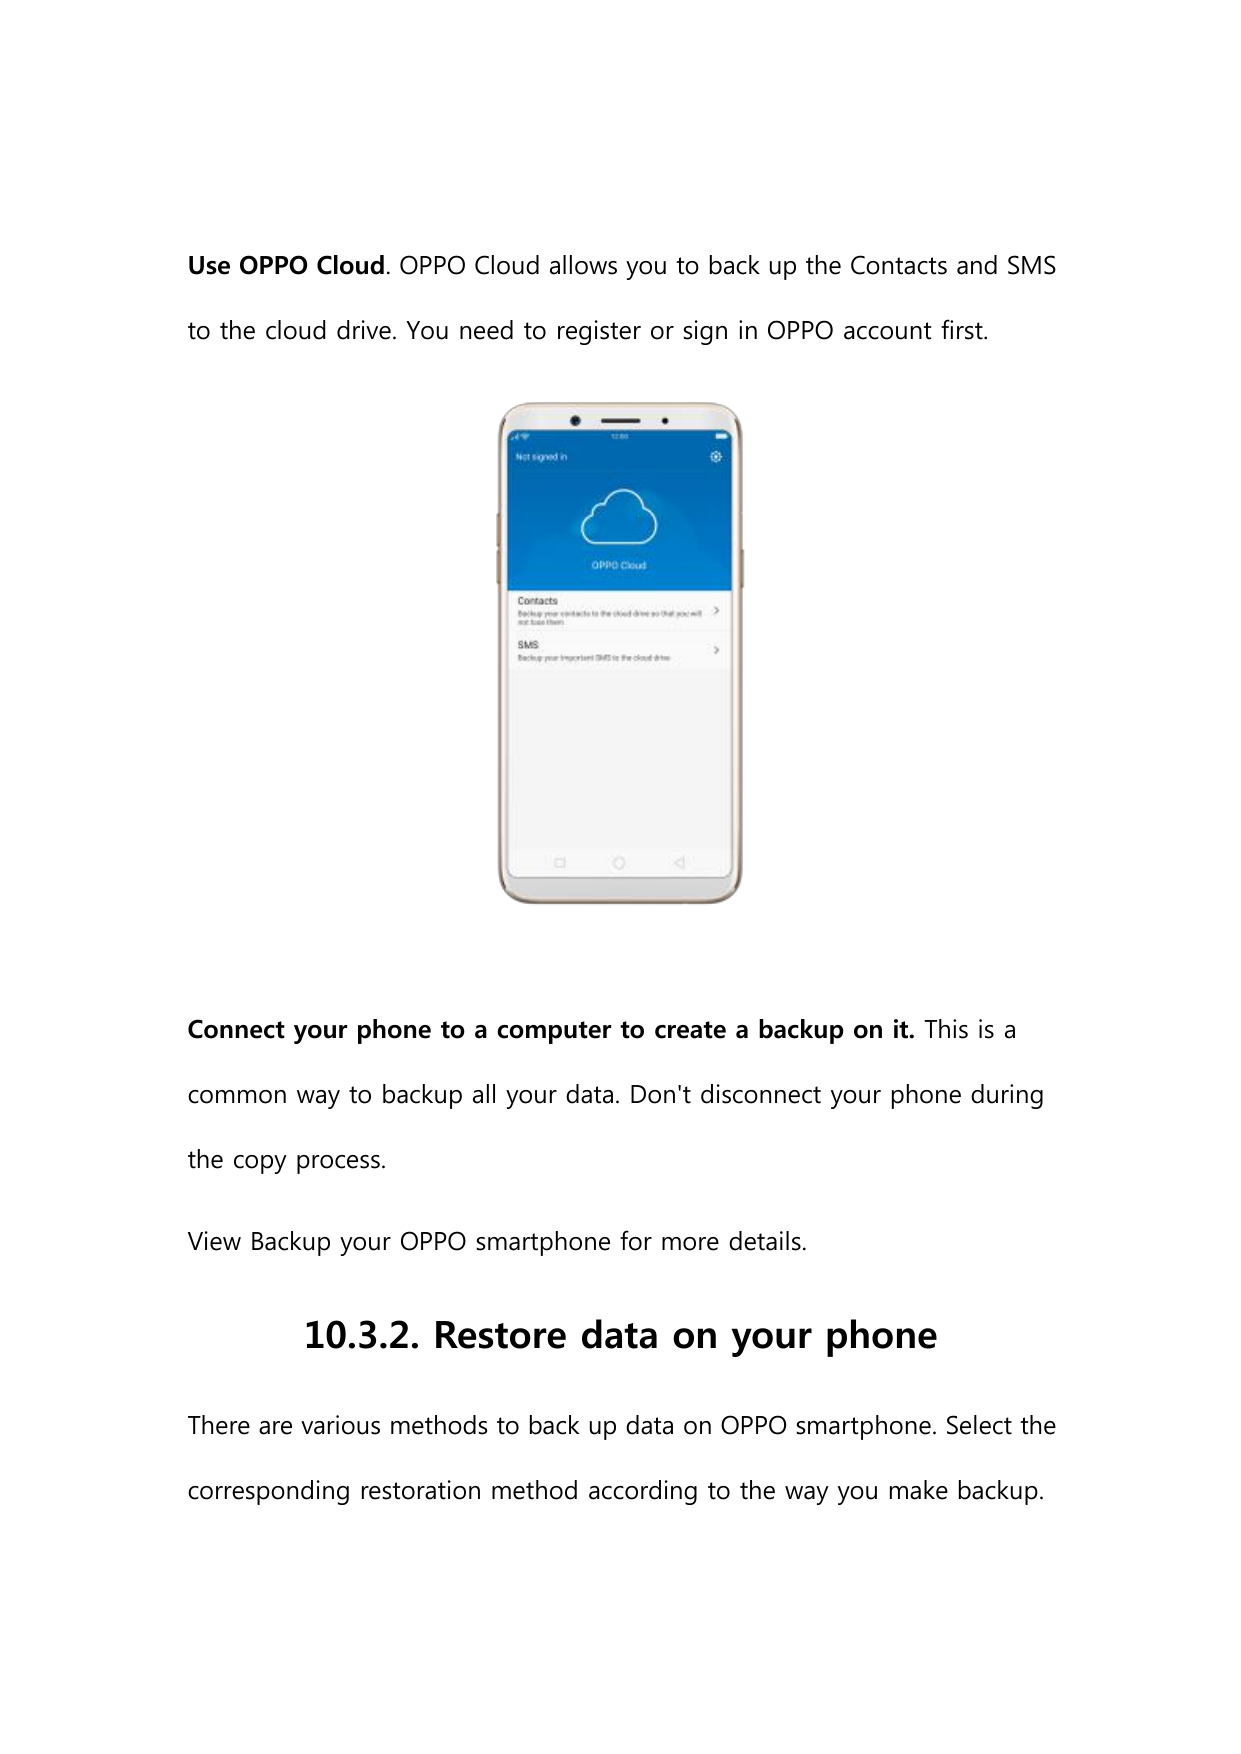 Use OPPO Cloud. OPPO Cloud allows you to back up the Contacts and SMSto the cloud drive. You need to register or sign in OPPO ac